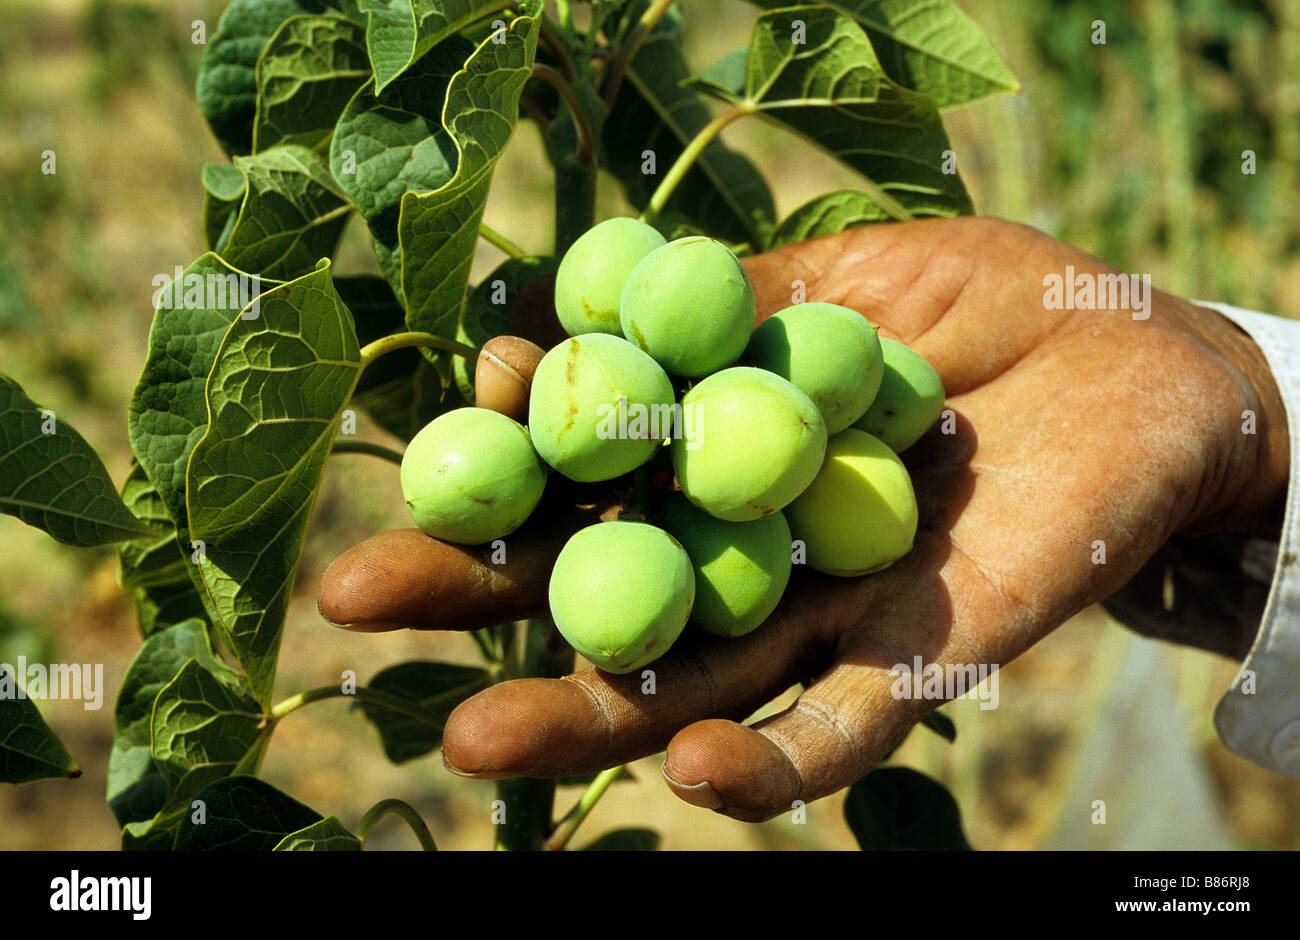 Asia India Gujarat Bhavnagar , trial farm of Jatropha curcus for research and production of biodiesel Stock Photo